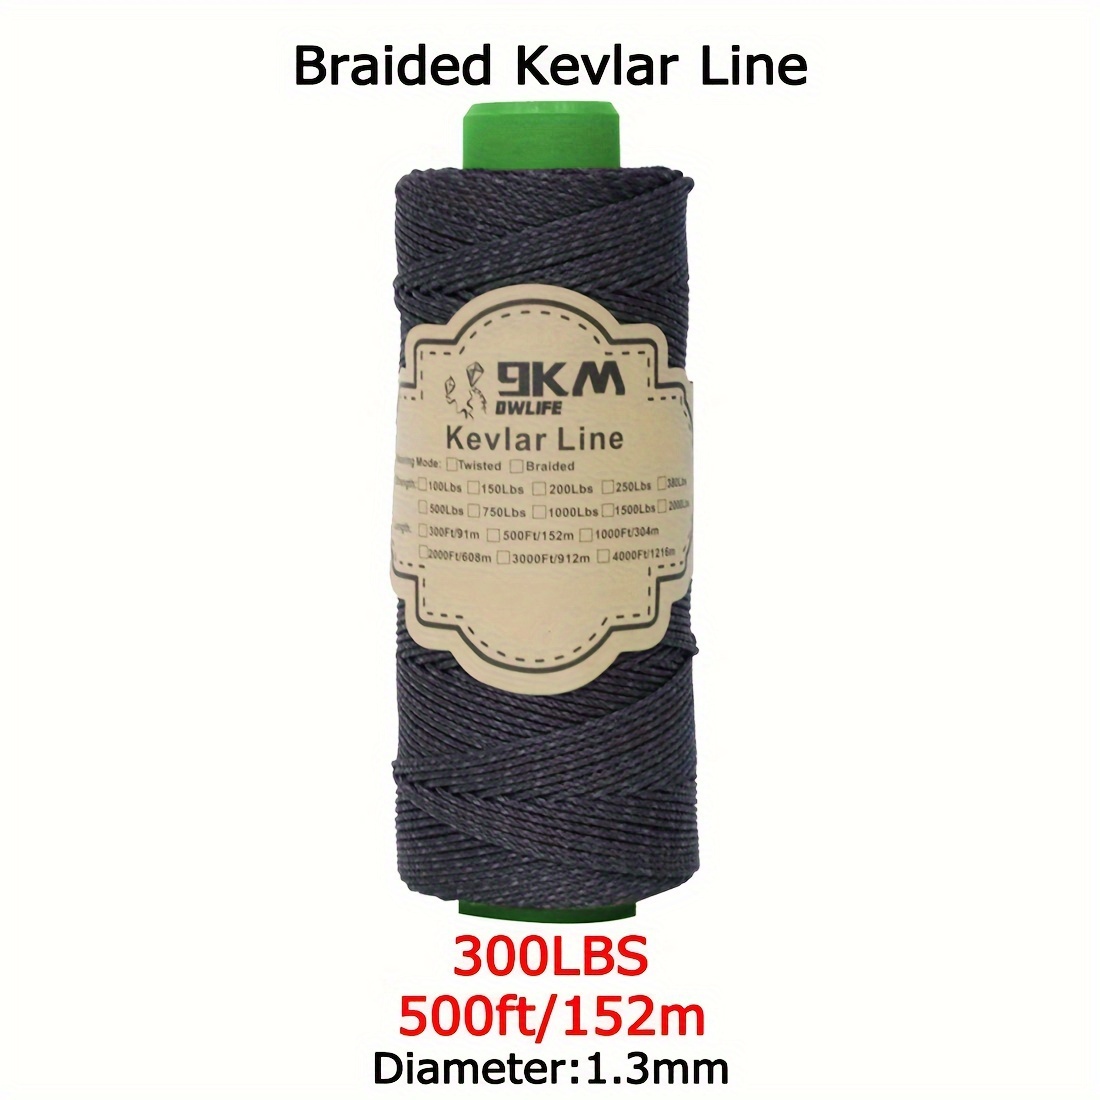 Braided Kevlar Line Fishing Assist Line Kite String Made with